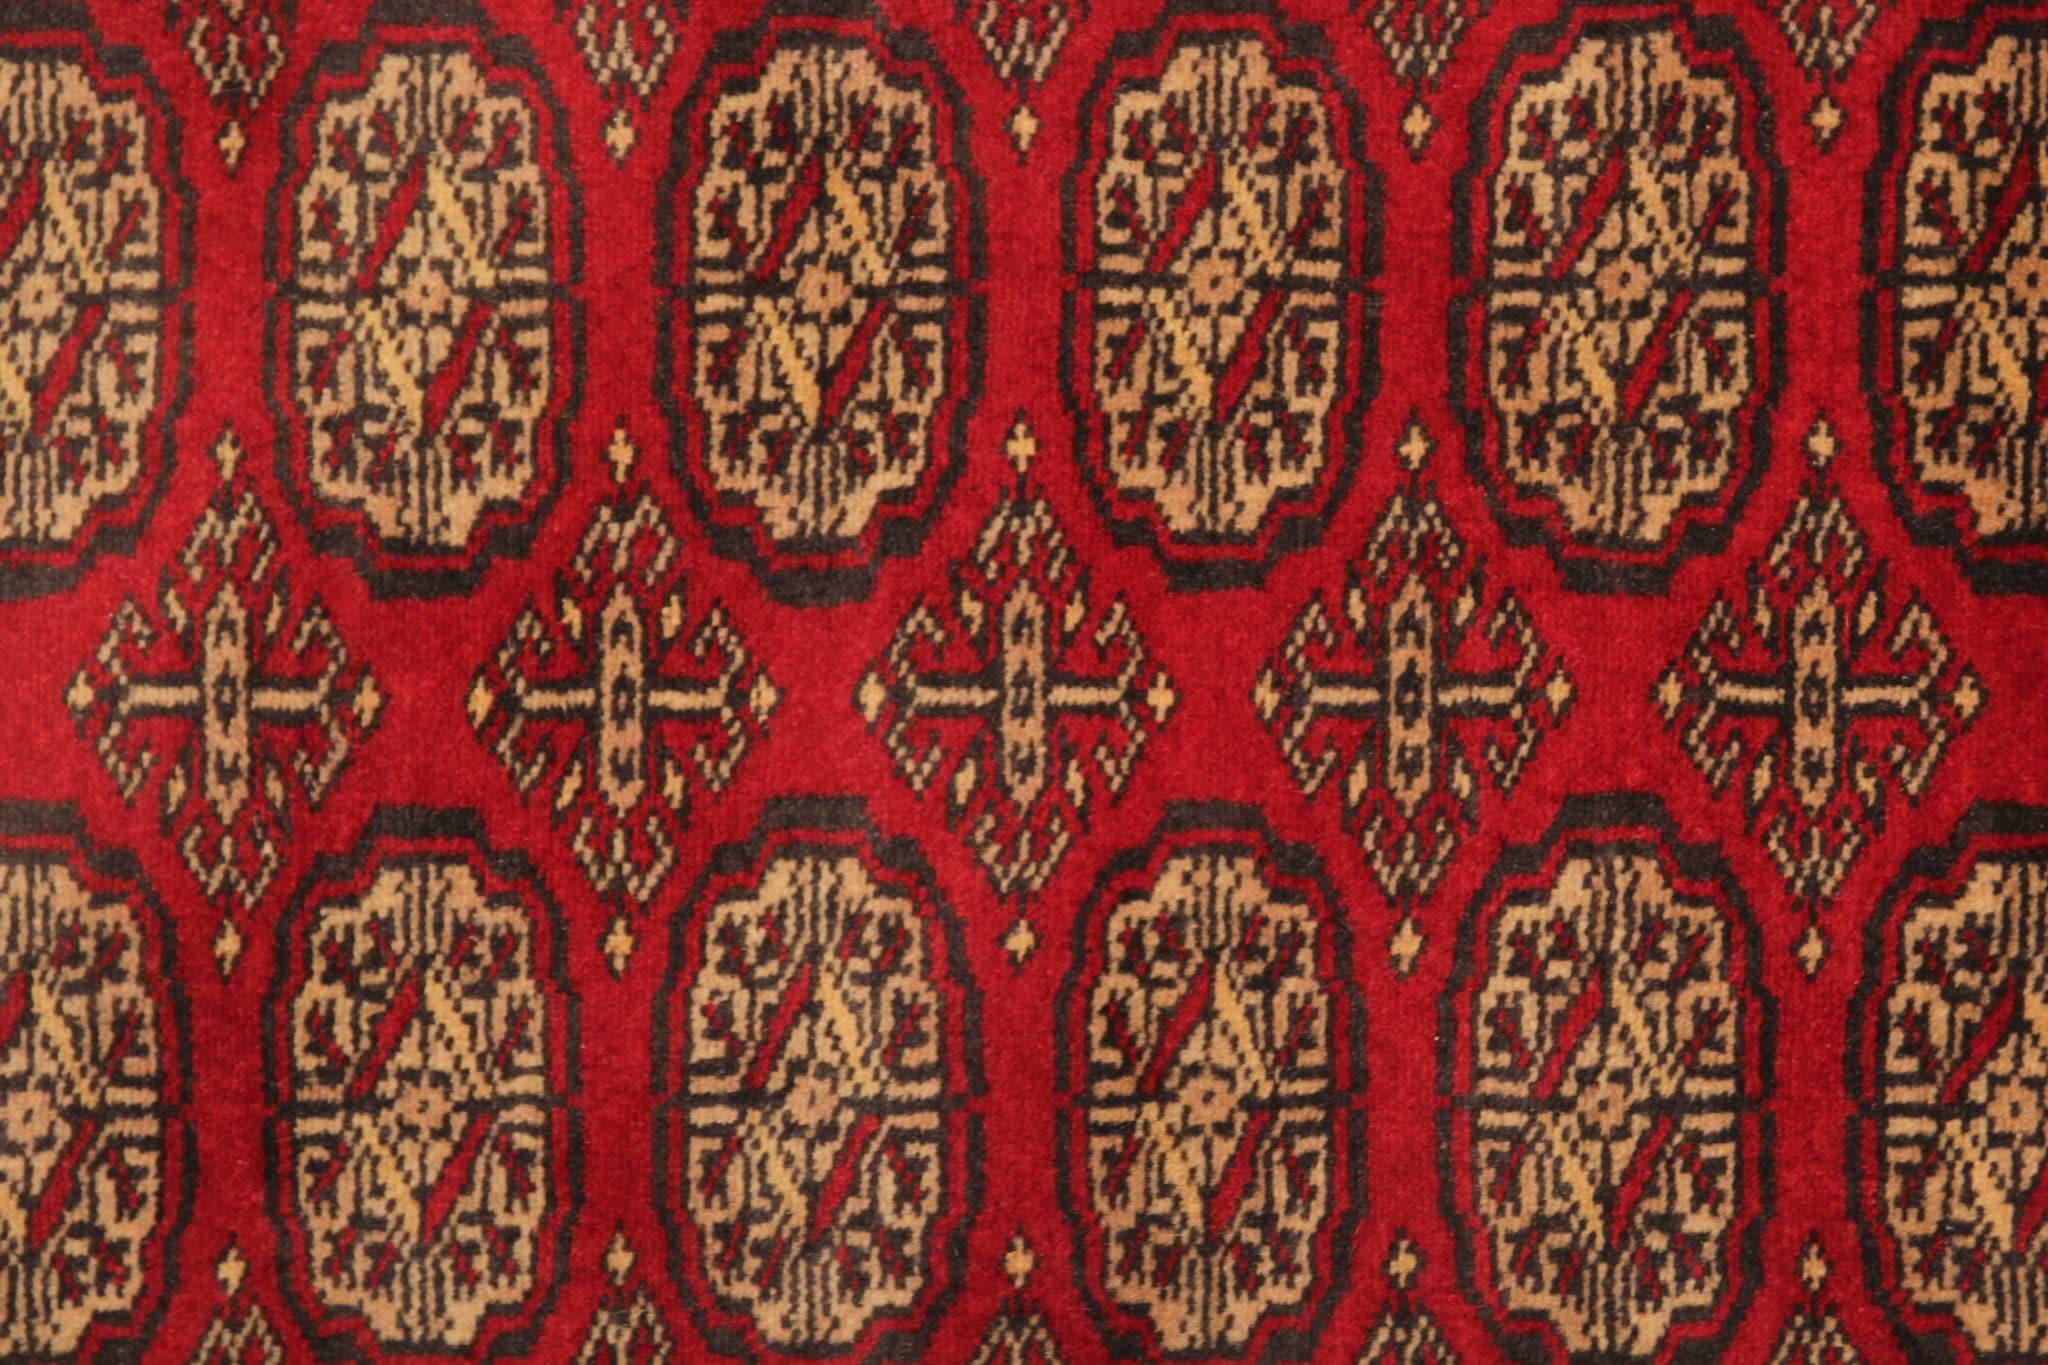 This red runner rug is a true embodiment of timeless elegance and heritage. Hand-knotted with meticulous craftsmanship, this vintage stair runner boasts a striking medallion design that infuses a sense of tradition and cultural richness into your